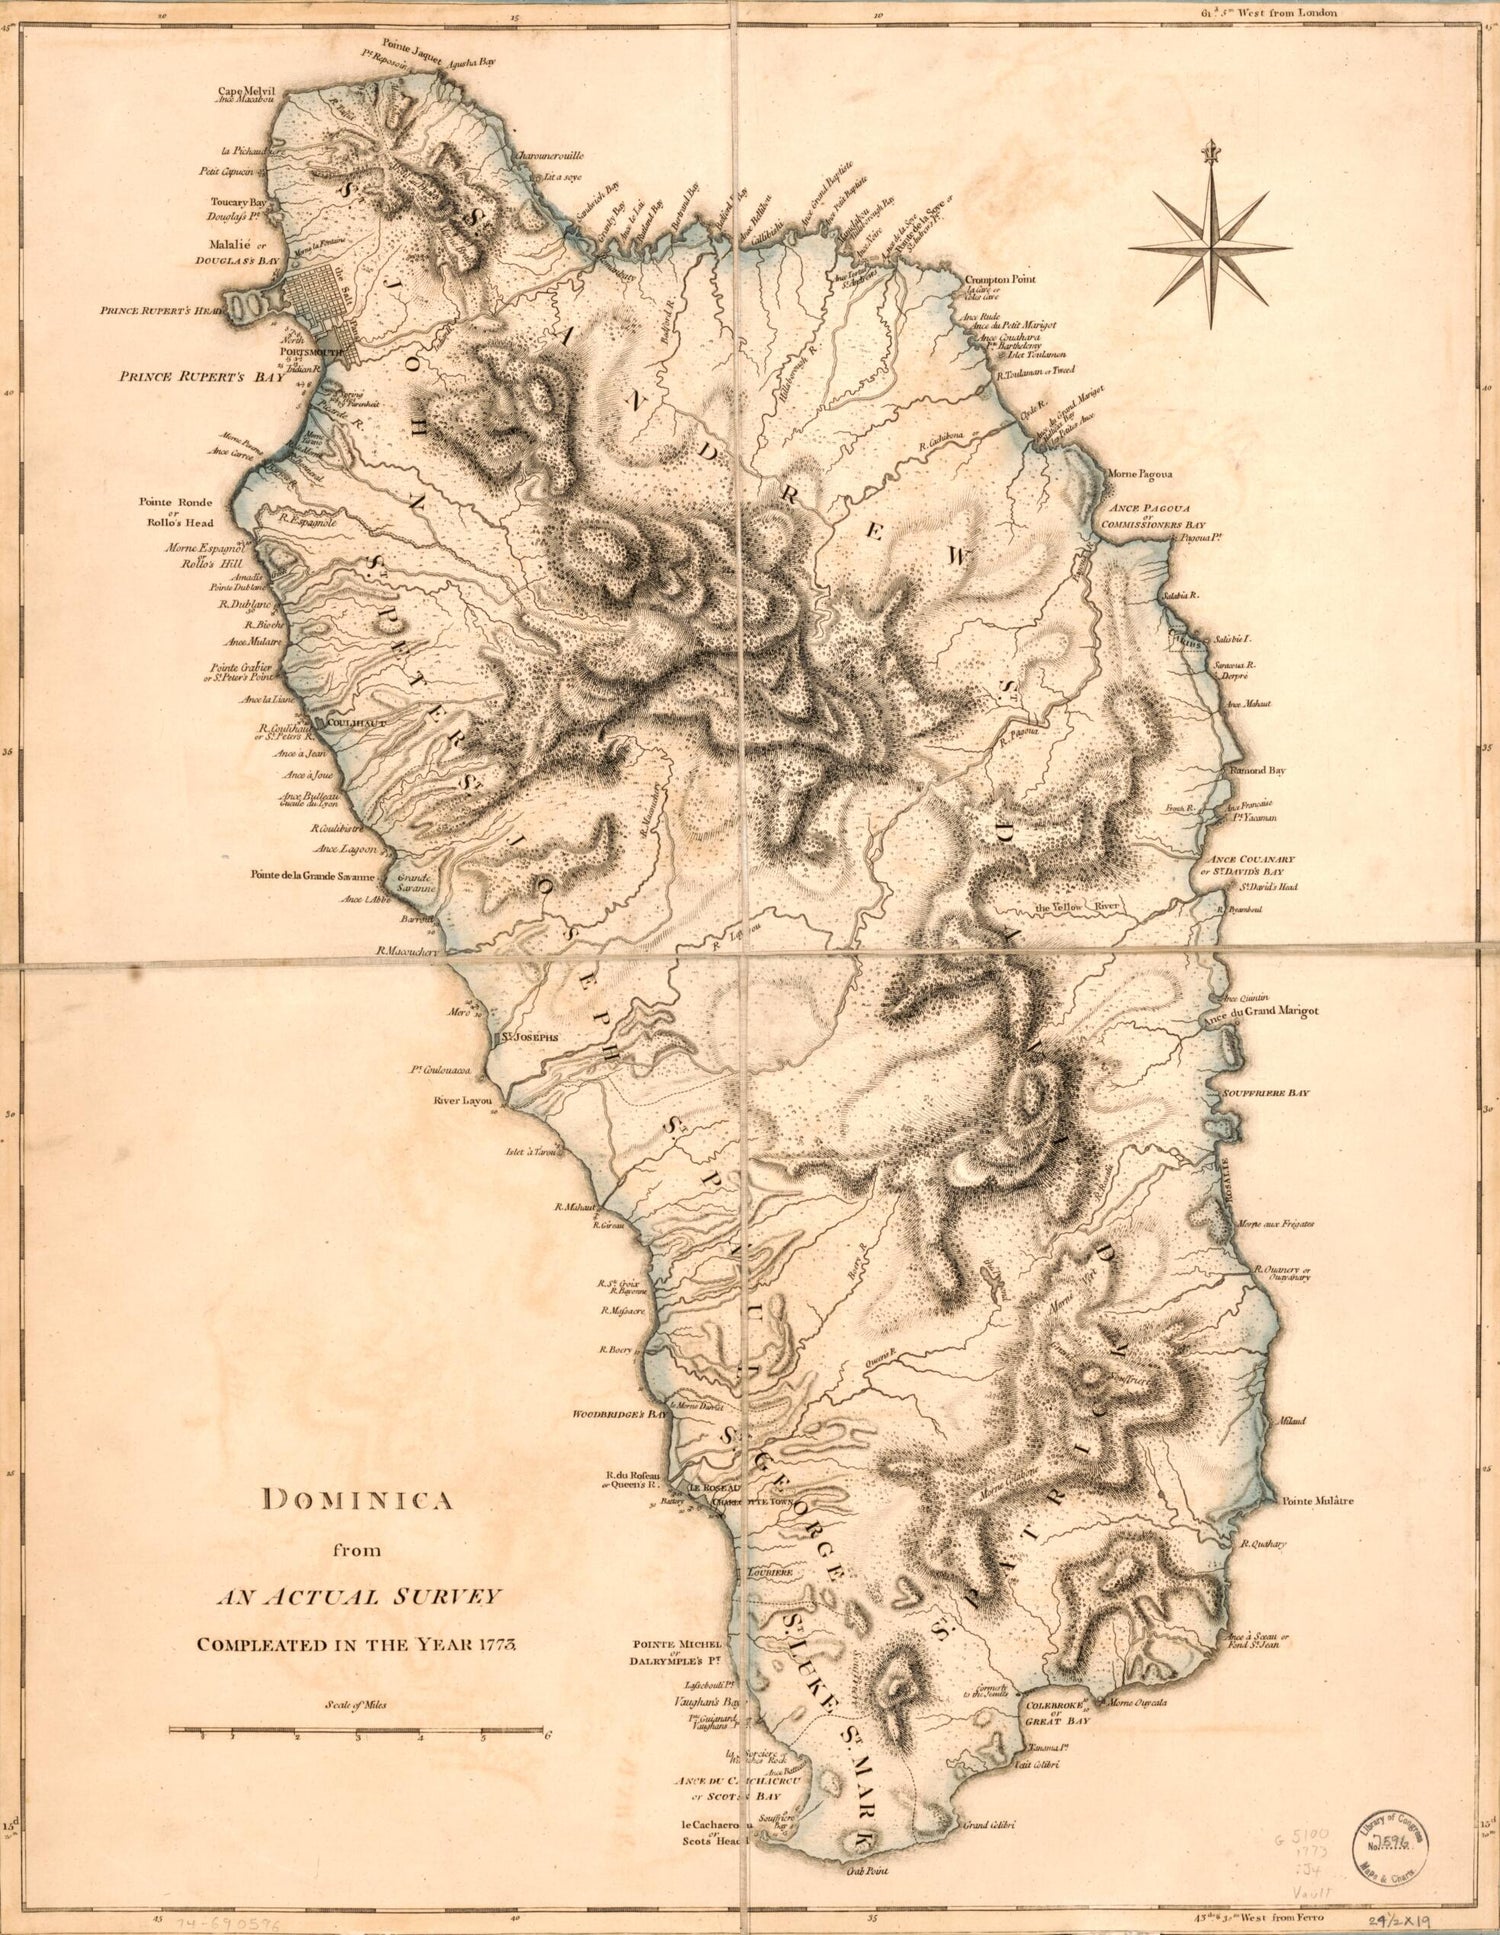 This old map of Dominica, from an Actual Survey Compleated In the Year 1773 from 1775 was created by Thomas] [Jefferys in 1775